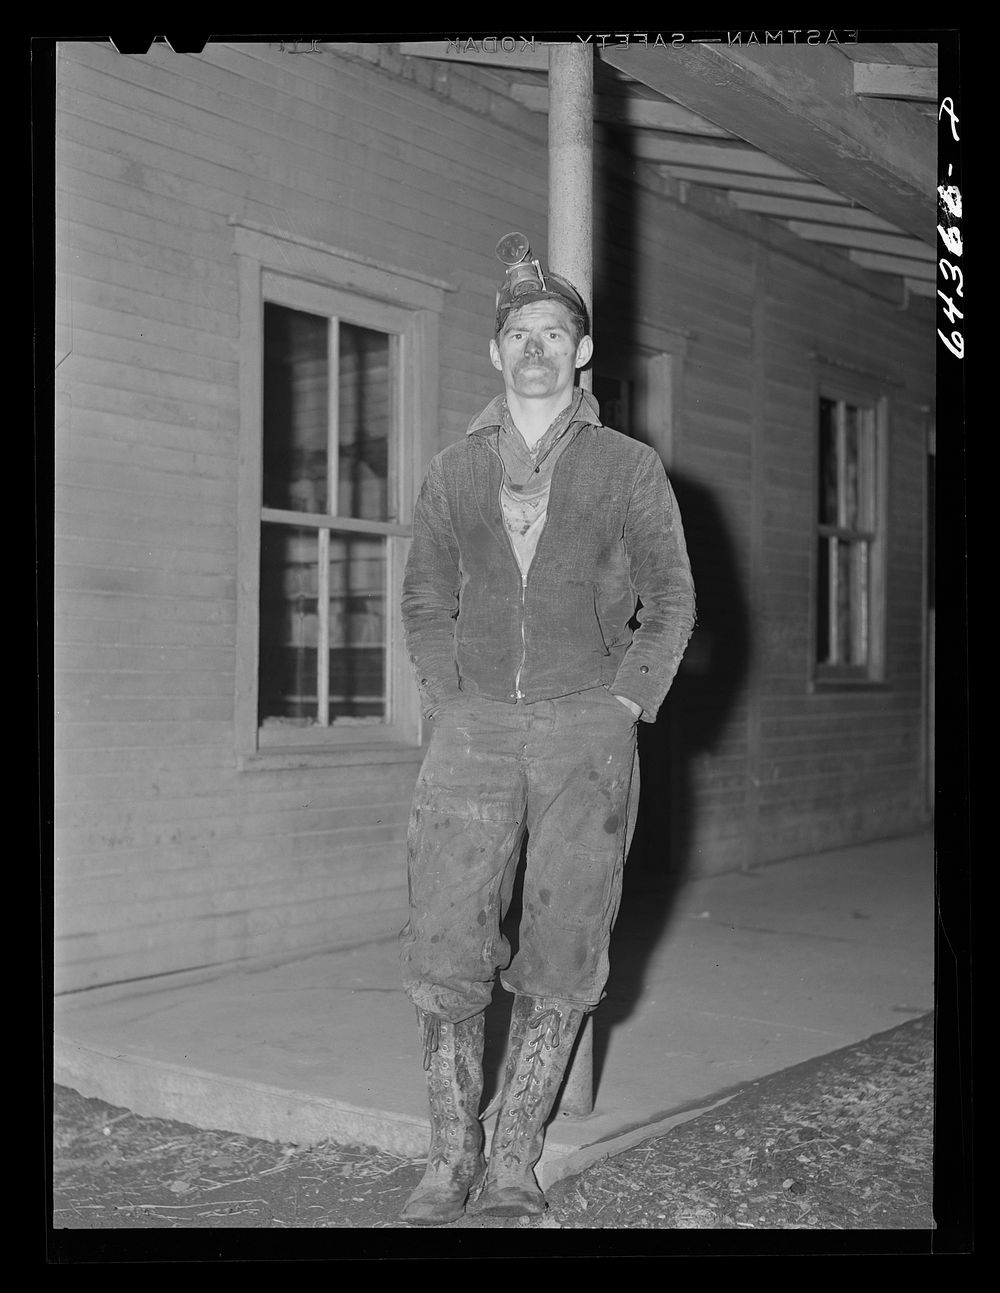 [Untitled photo, possibly related to: Pomeroy, Ohio. Coal miner]. Sourced from the Library of Congress.